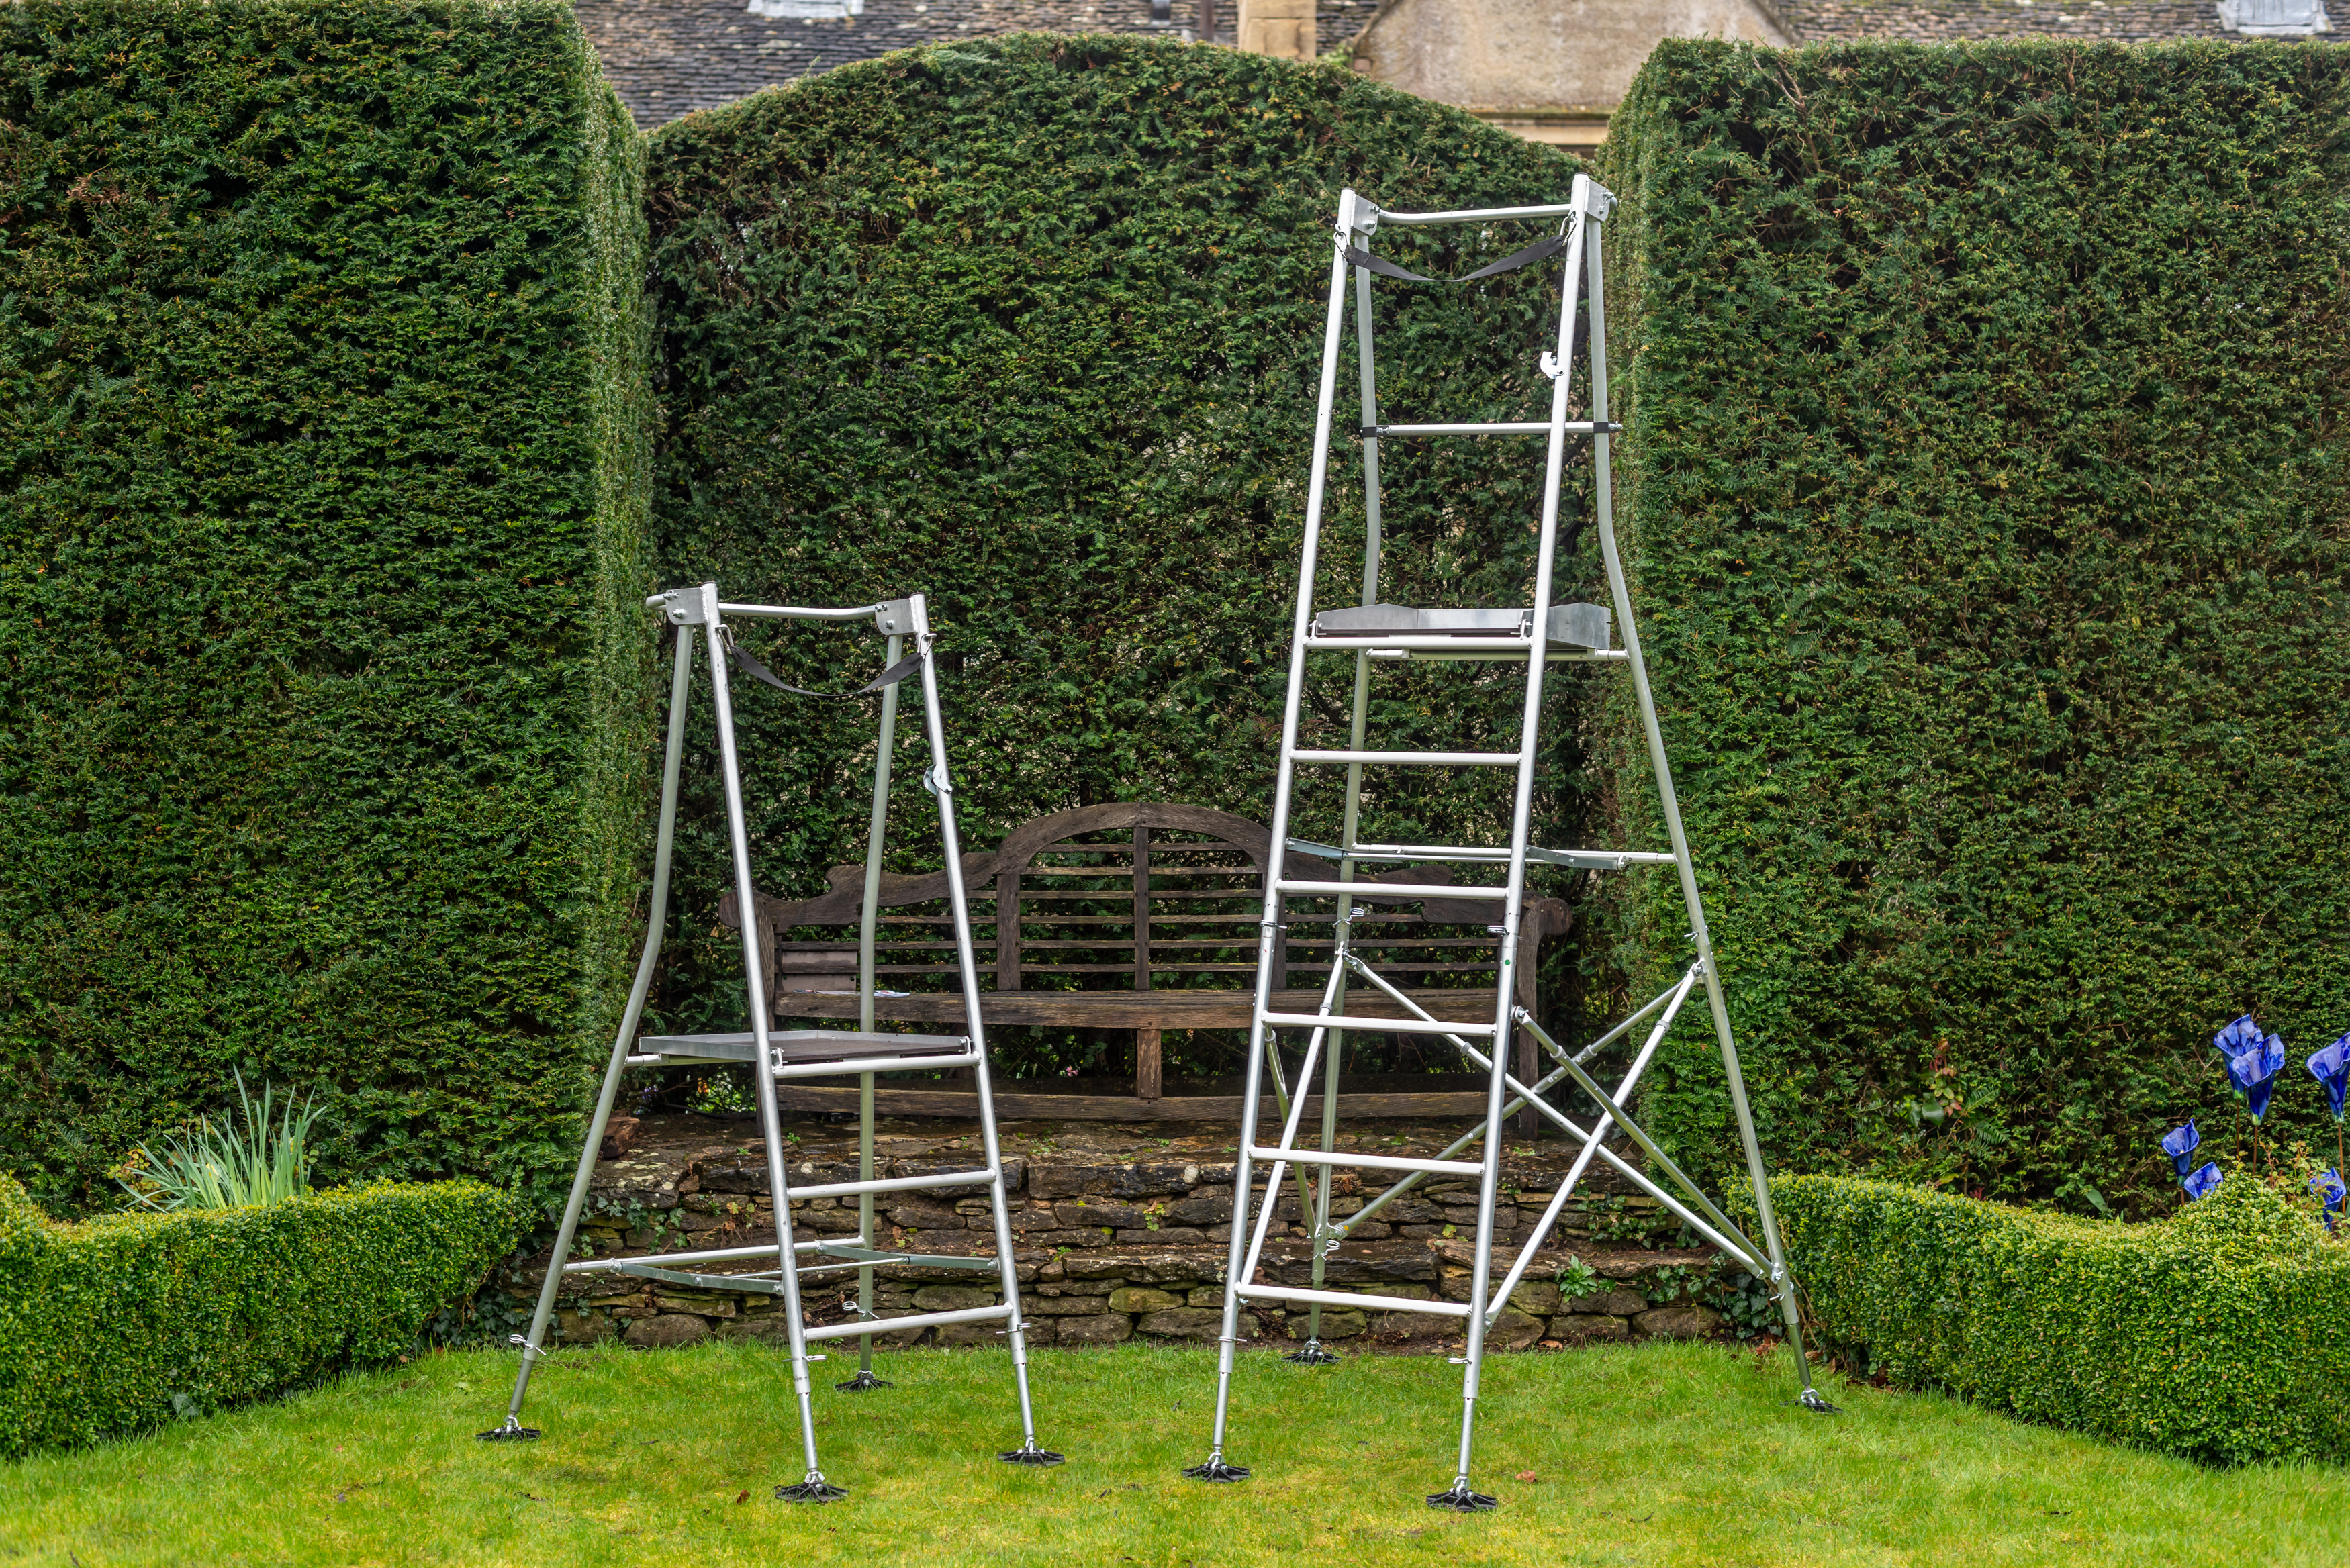 Which Ladder Do I Need?